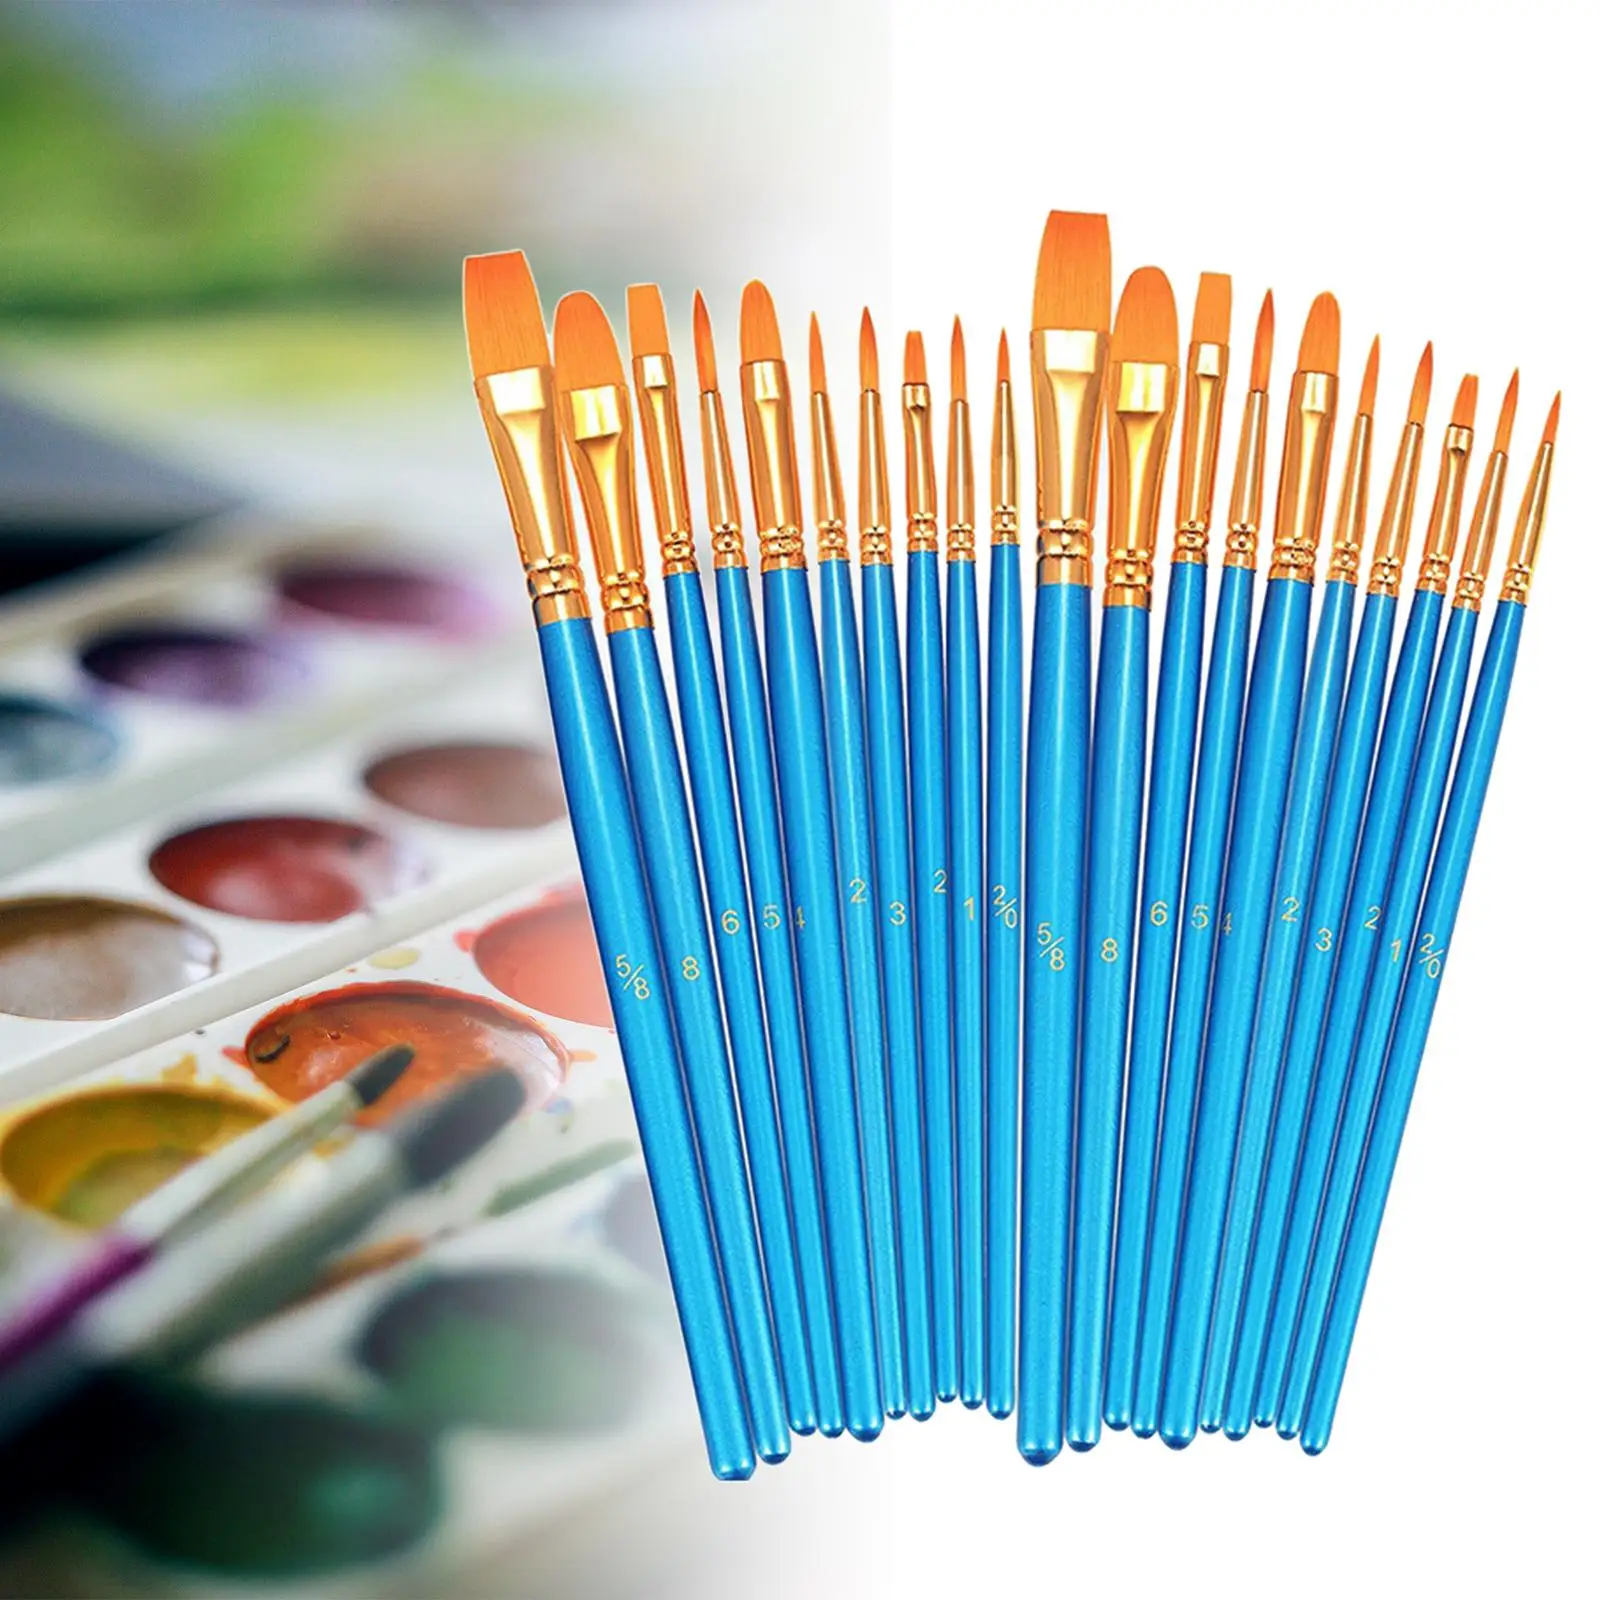 20x Paint Brush Set Gift for Artists Amateurs Portable Drawing Art Supplies for Gouache Miniature Detailing Oil Acrylic Painting